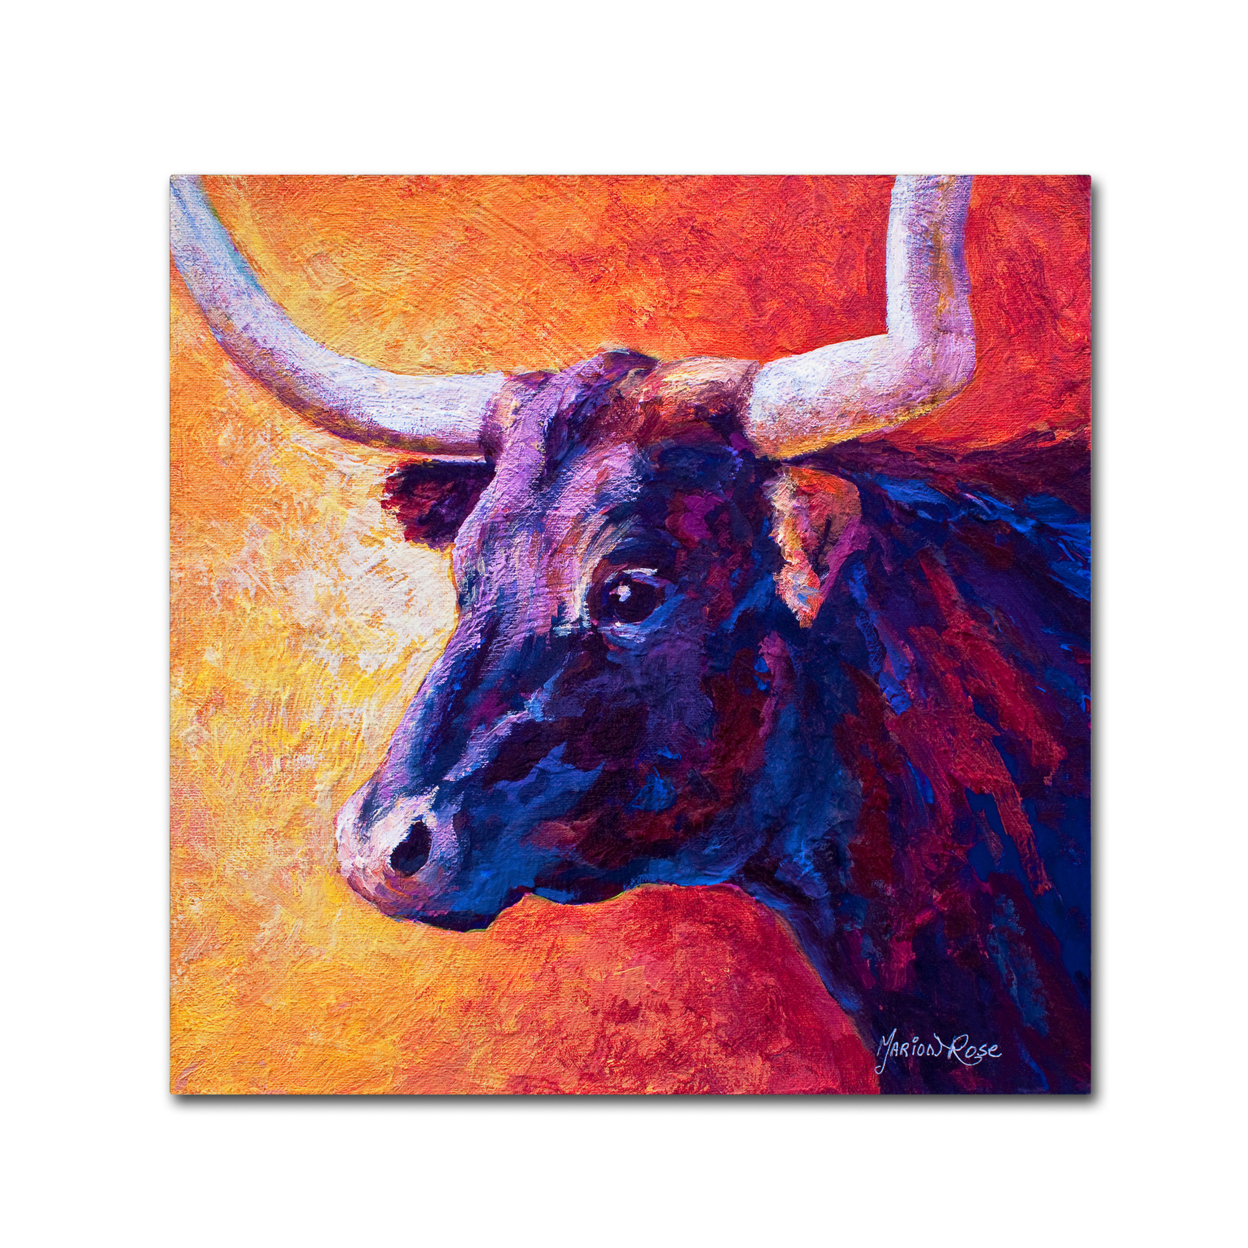 Marion Rose 'Violet Cow' Ready To Hang Canvas Art 35 X 35 Inches Made In USA